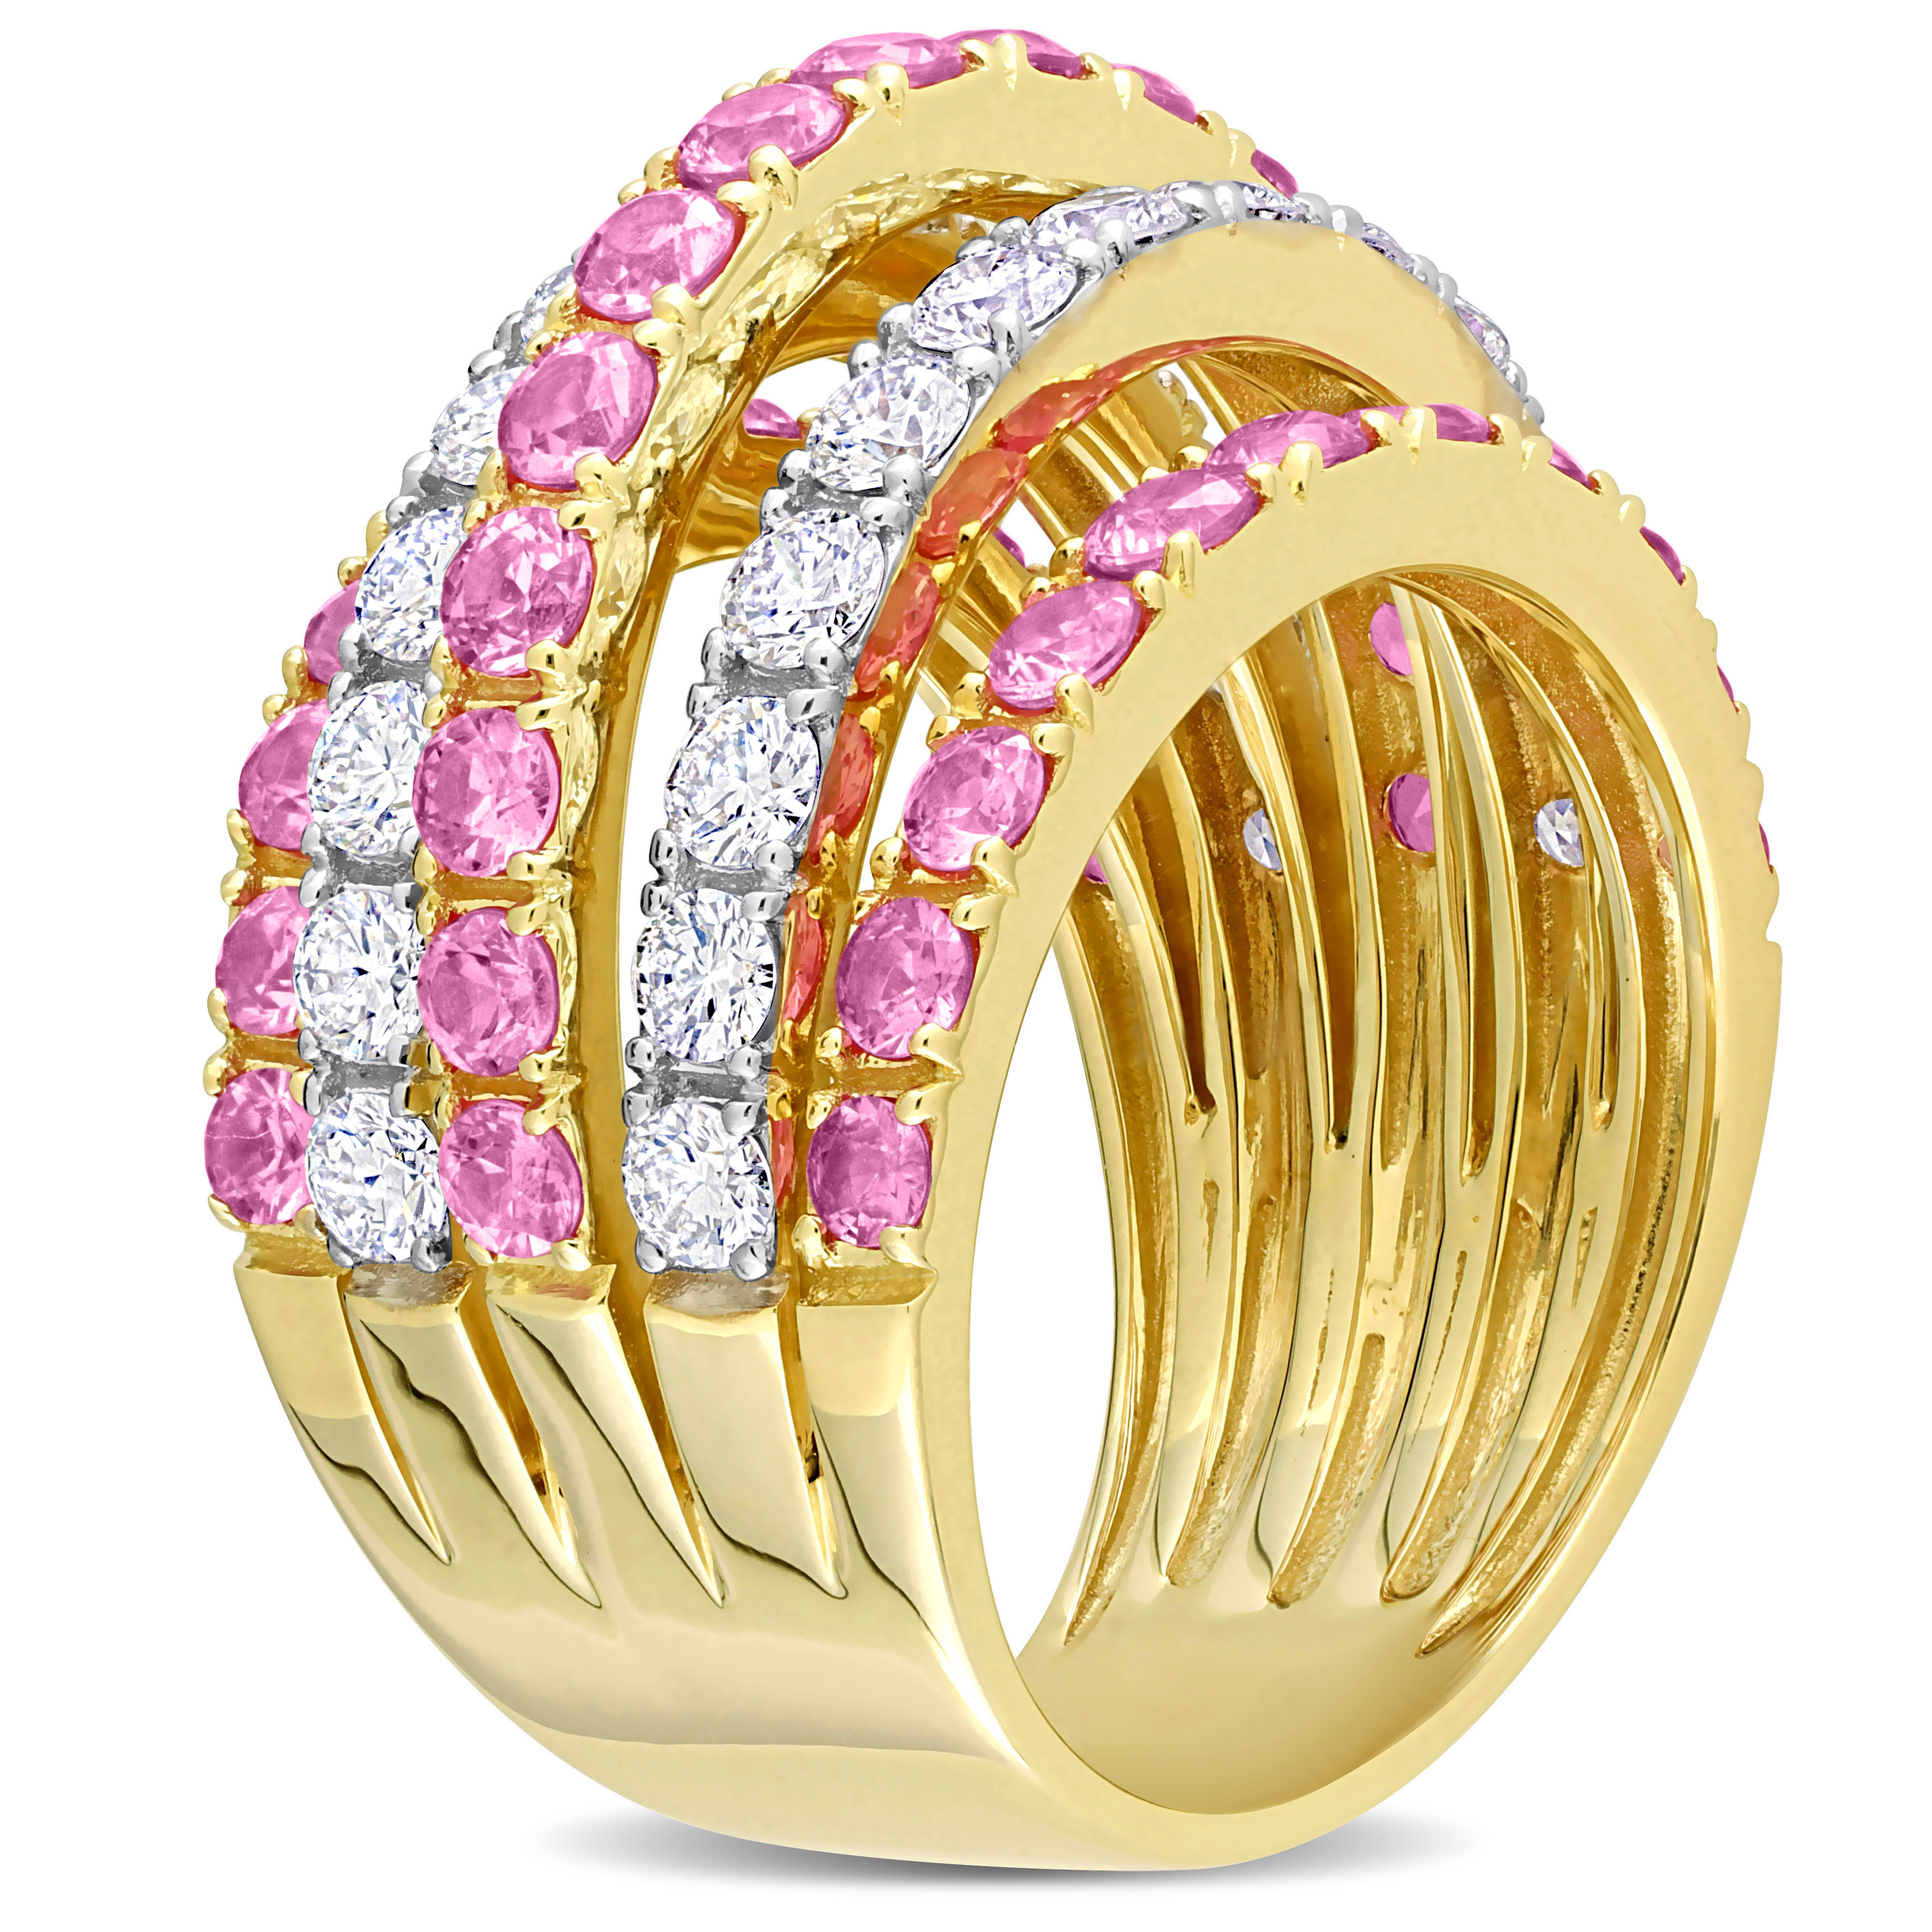 2 1/10 CT TGW Pink Sapphire and 1 1/3 CT TW Diamond Open 5-Row Wide Band Ring in 14k Yellow Gold